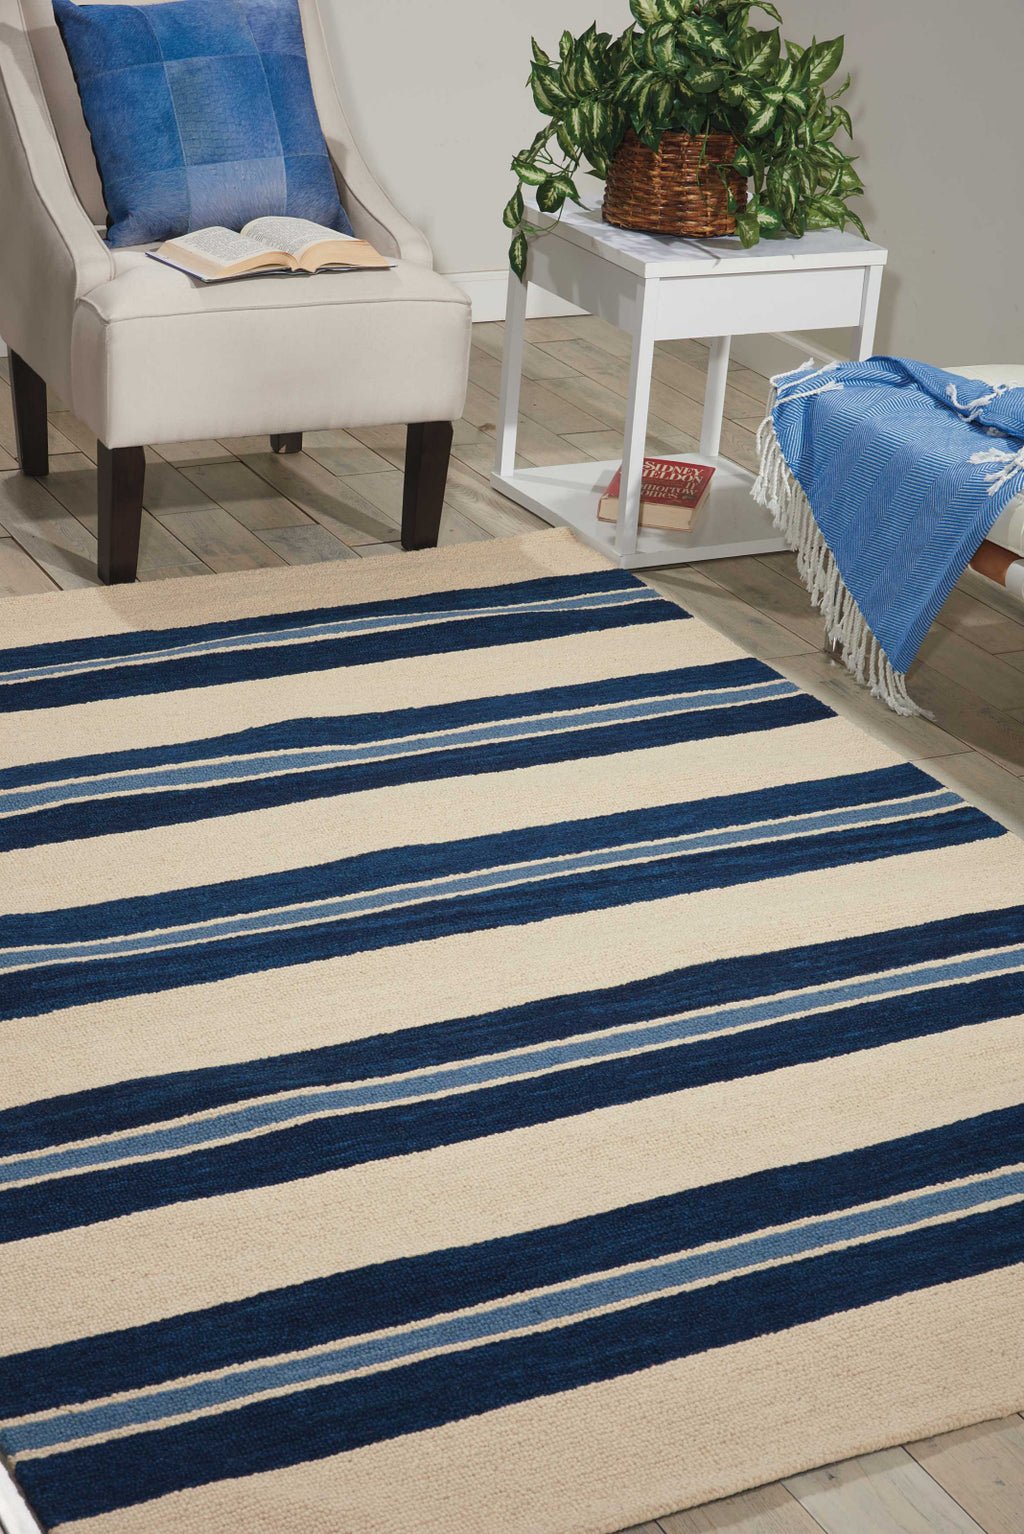 Nourison Oxford OXFD2 Awning Stripe Area Rug by Barclay Butera Room Image Feature